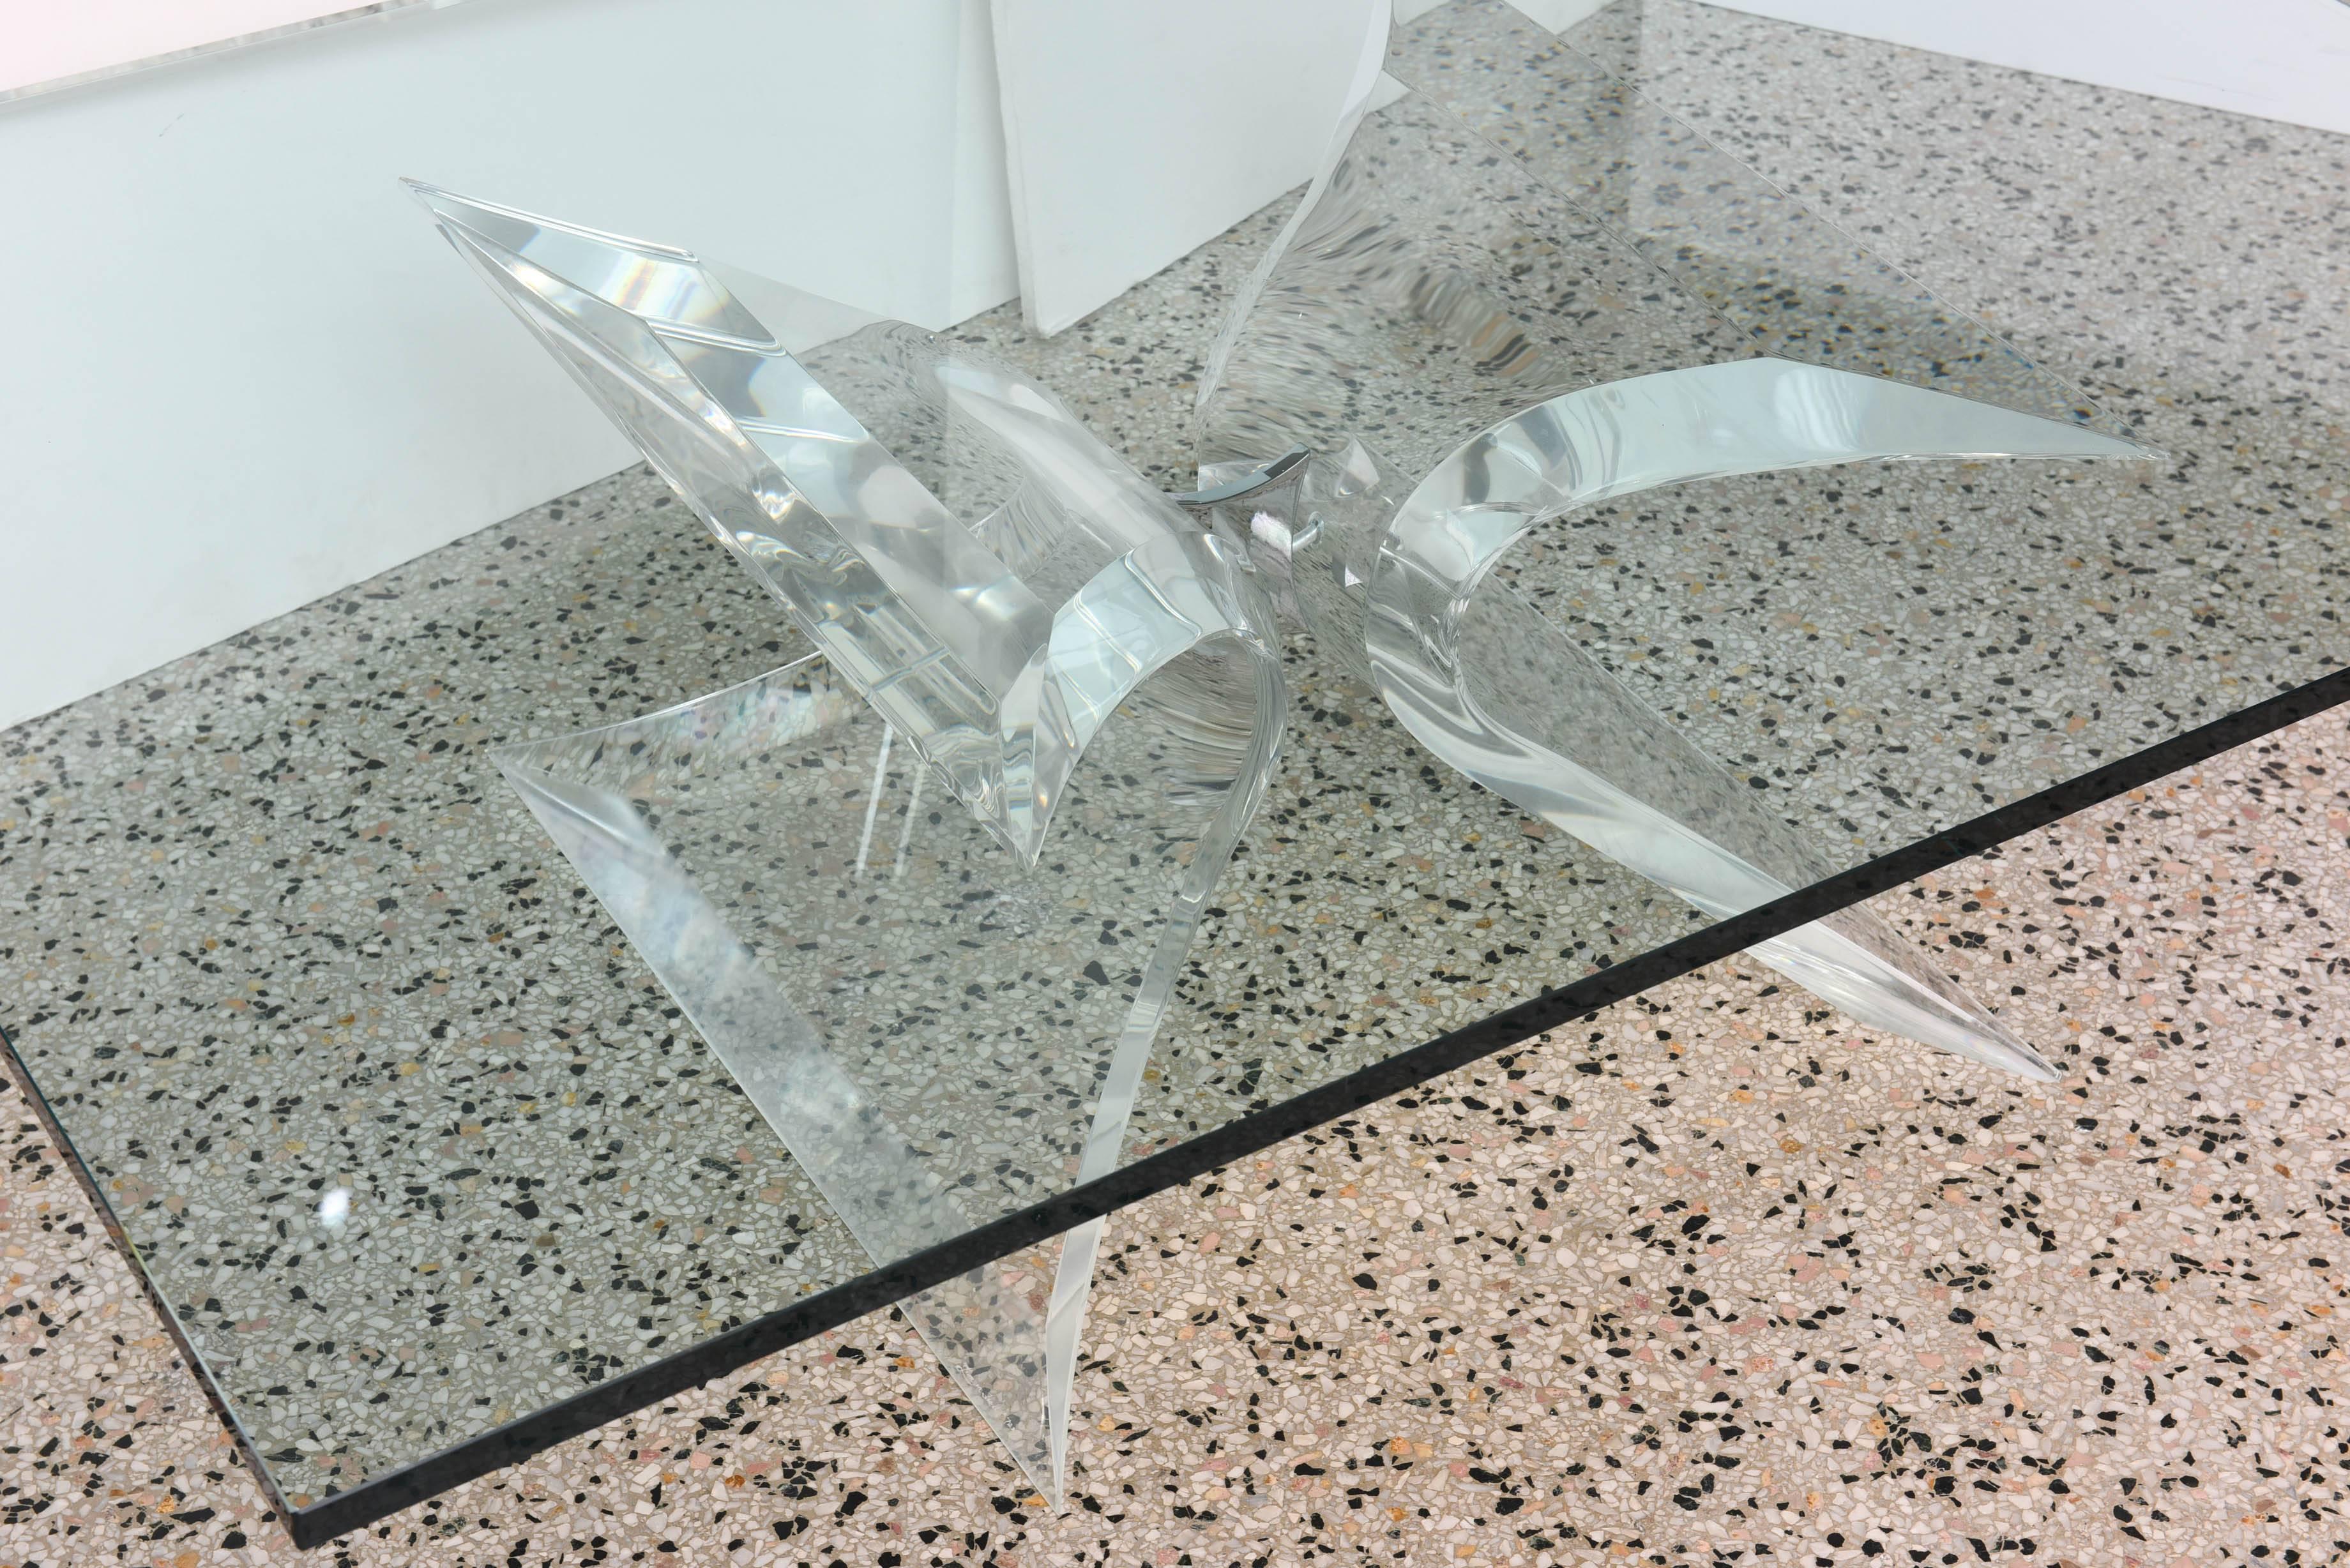 This stylish cocktail table was produced by the iconic firm of Lion in Frost in the 1970s.

The signed Lucite base is the 